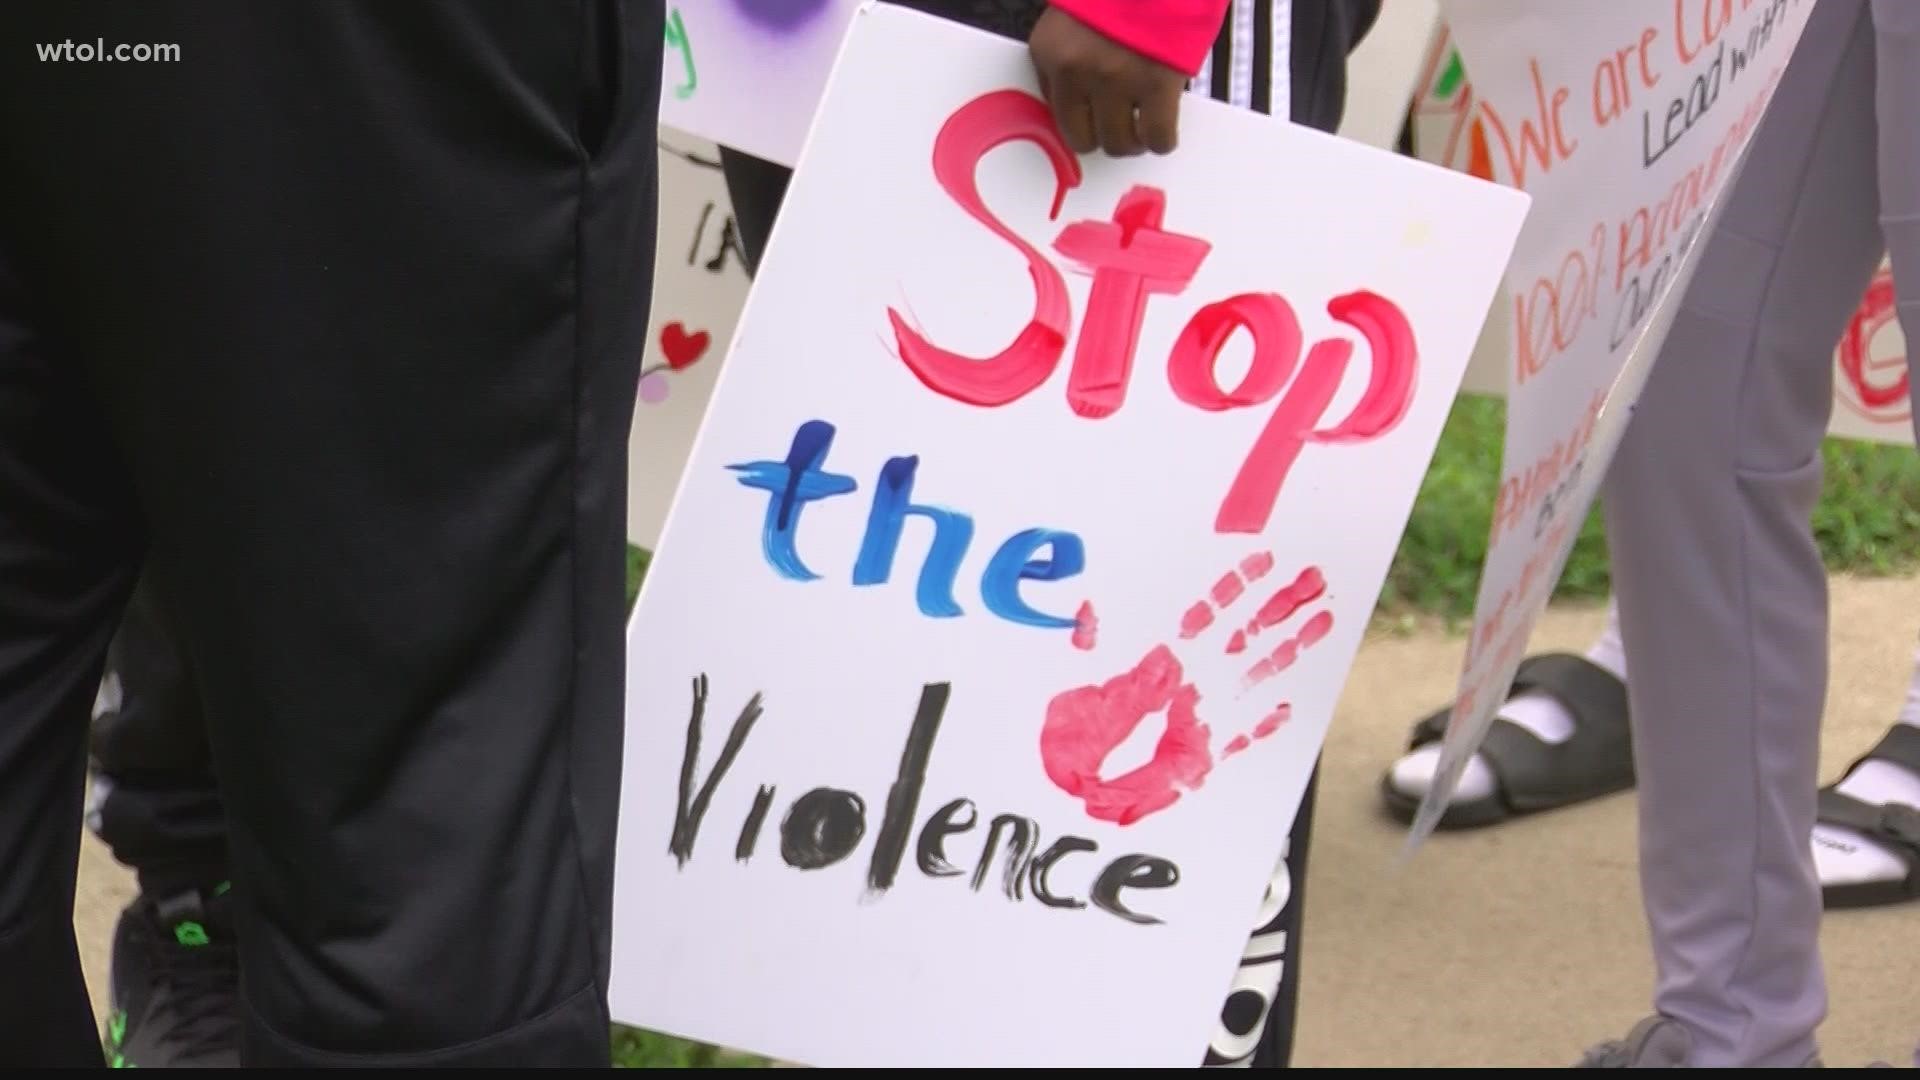 Save Our Community, along with other city groups, marched down Detroit Ave. on Saturday calling to "change the community" and stop the violence.